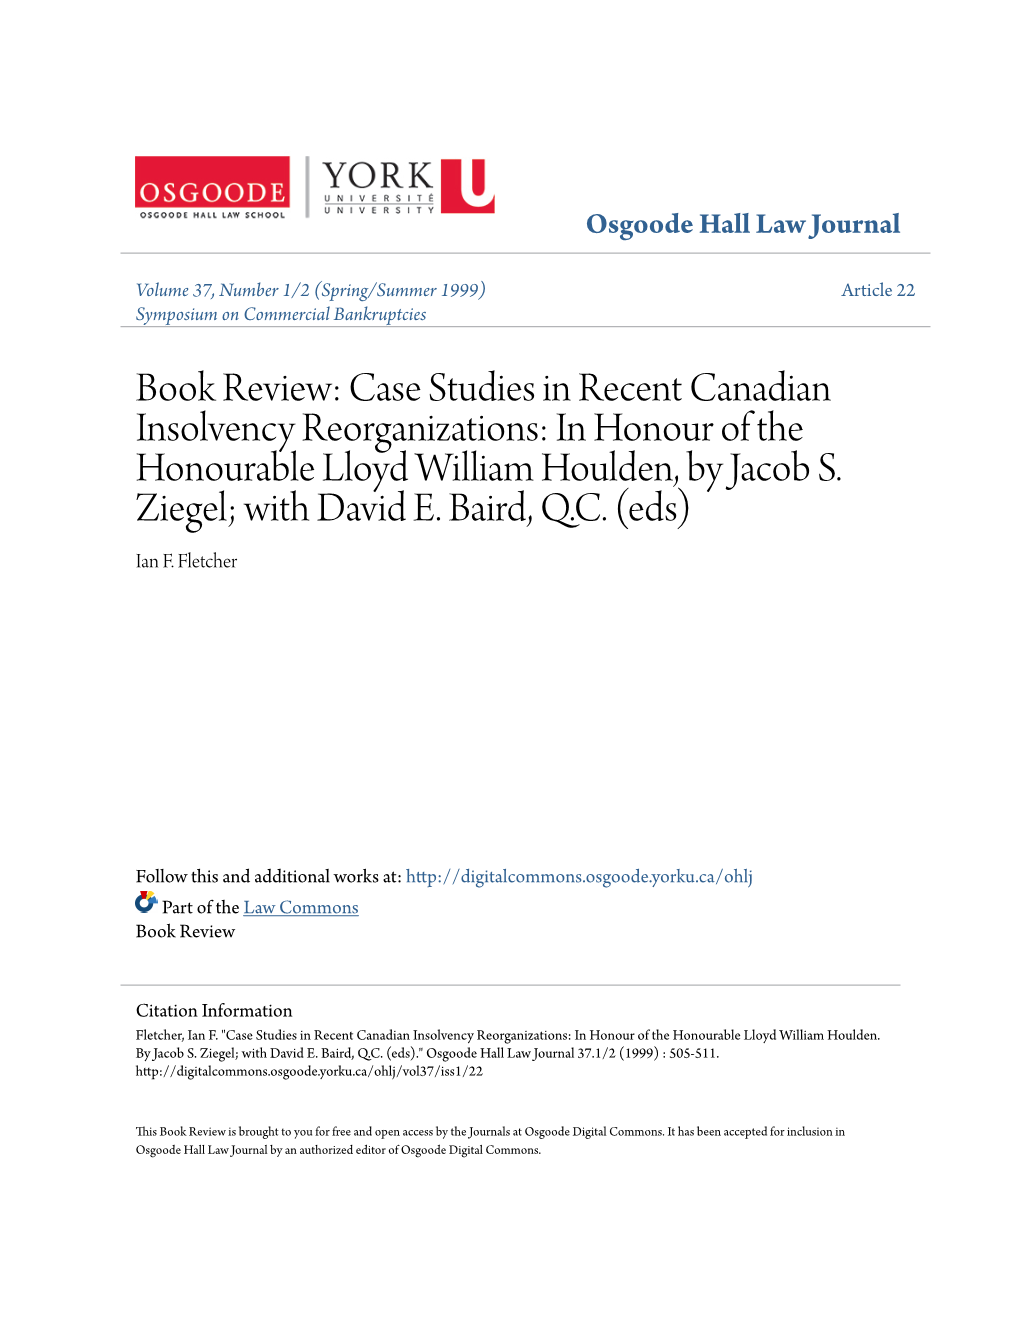 Book Review: Case Studies in Recent Canadian Insolvency Reorganizations: in Honour of the Honourable Lloyd William Houlden, by Jacob S